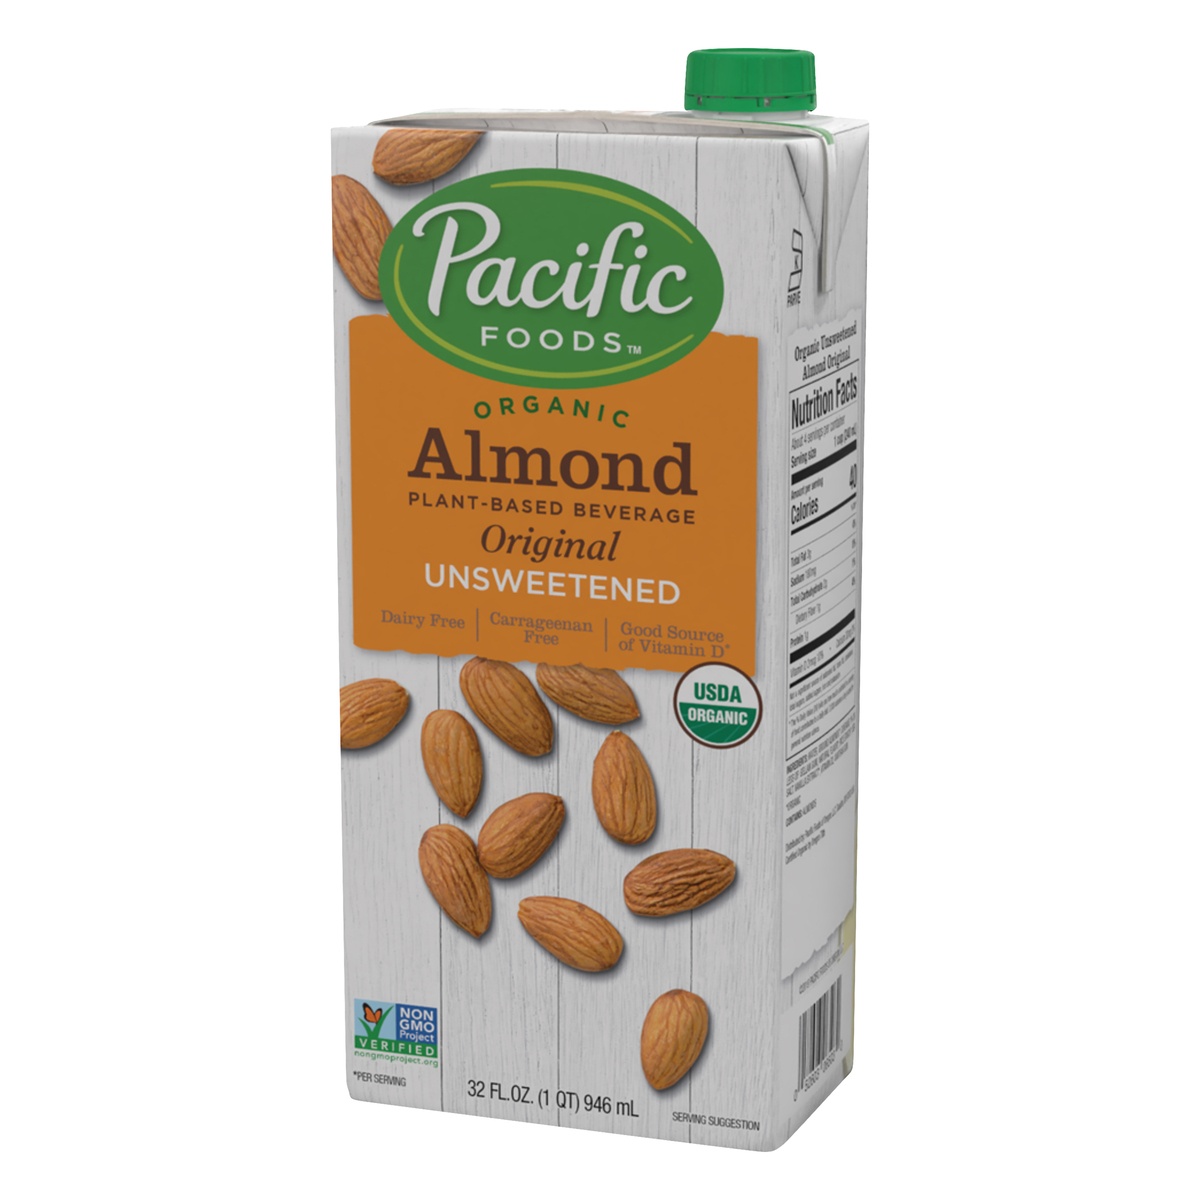 slide 3 of 9, Pacific Foods Organic Unsweetened Almond Original Plant-Based Beverage, 1 qt